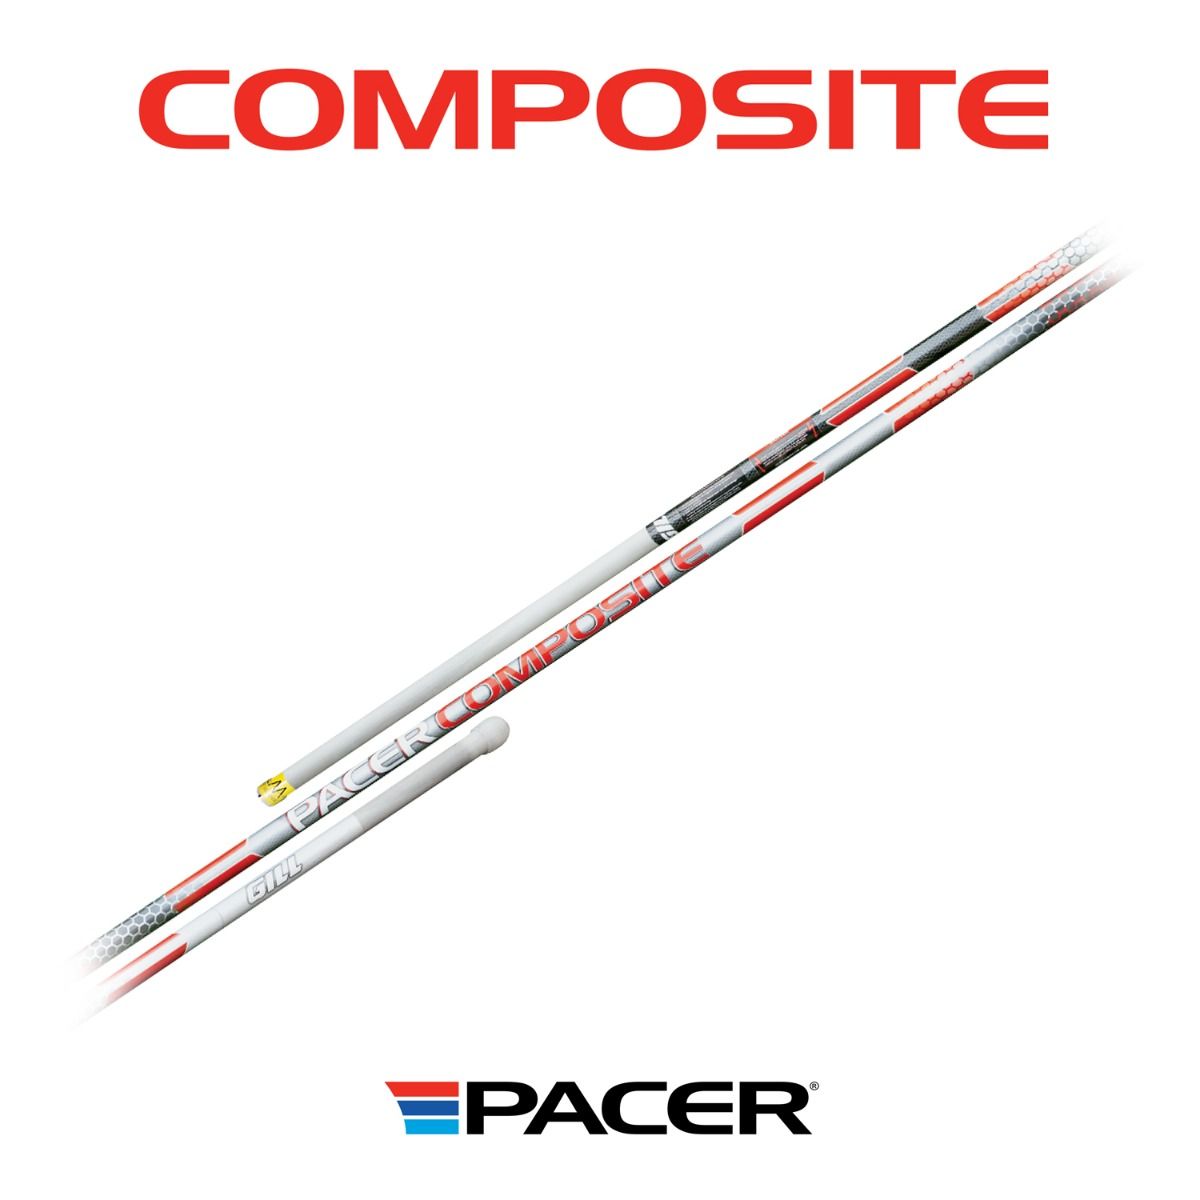 Pacer Composite Vaulting Poles. 3 vaulting poles showing each end and the middle